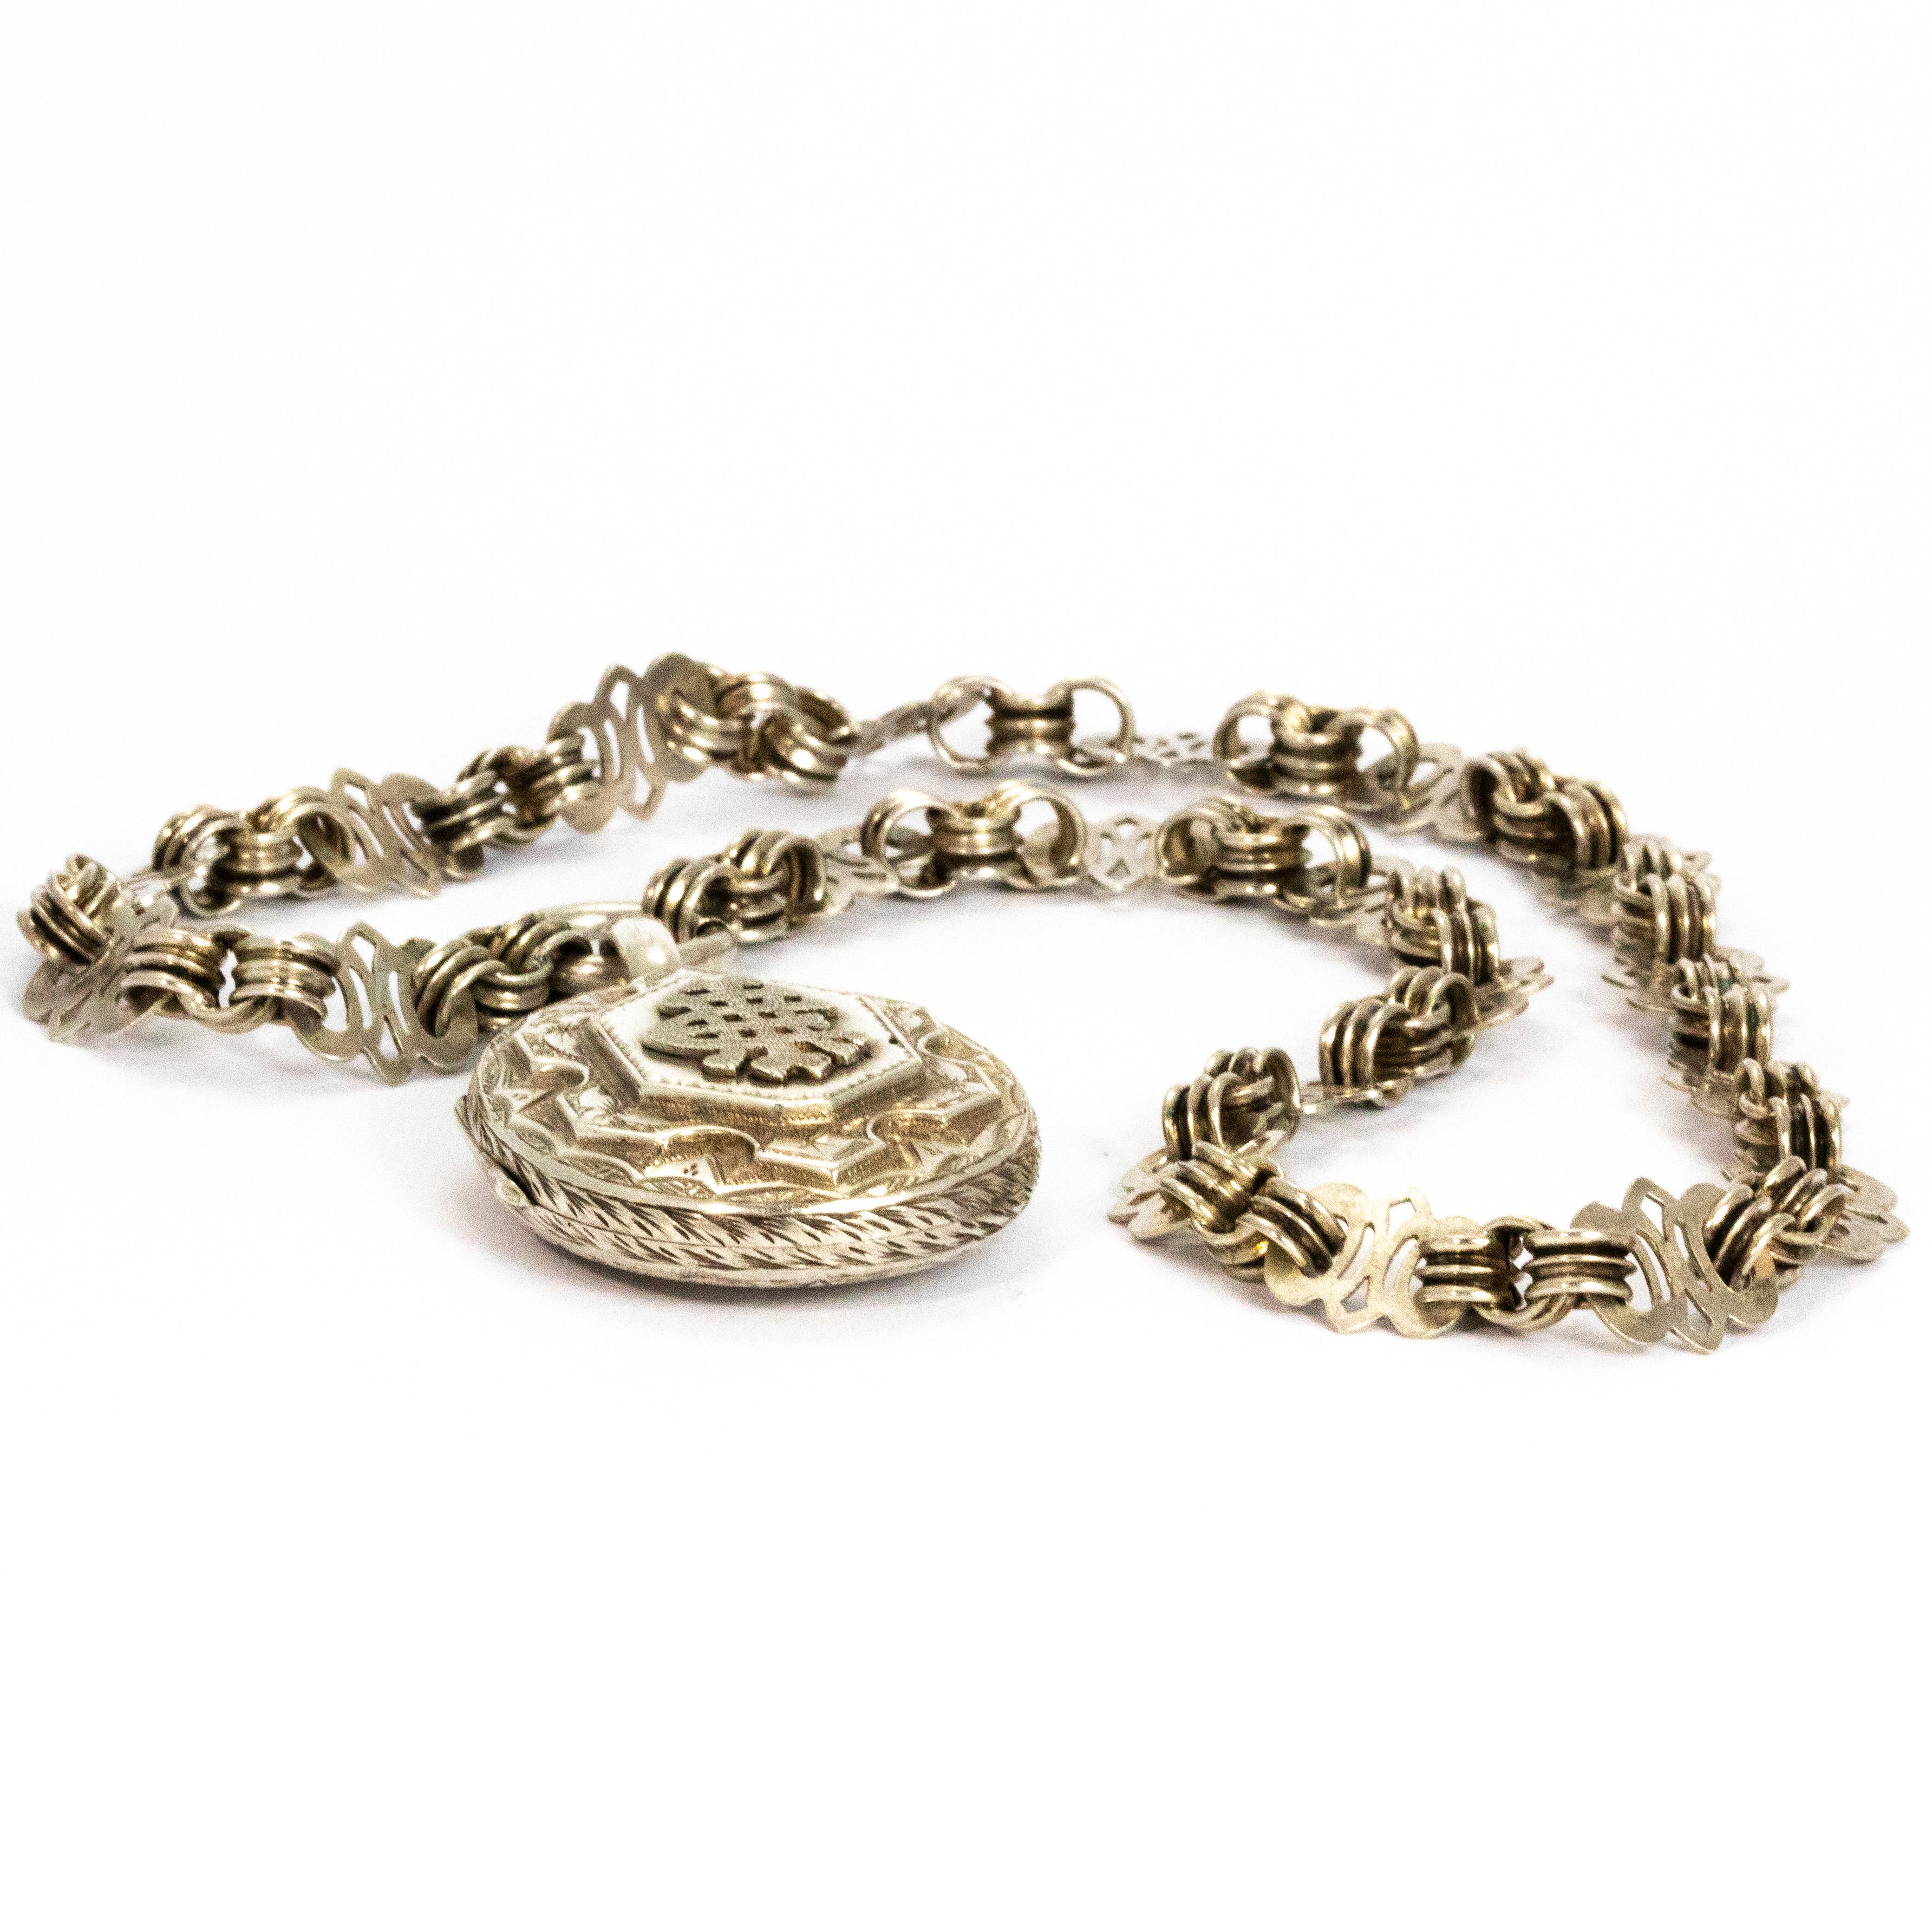 The detail on this necklace is absolutely stunning. The links on the chain have wonderful layered detail and such intricate detail. The chunky chain and locket are so stylish and the locket itself holds so much exquisite engraving and layered